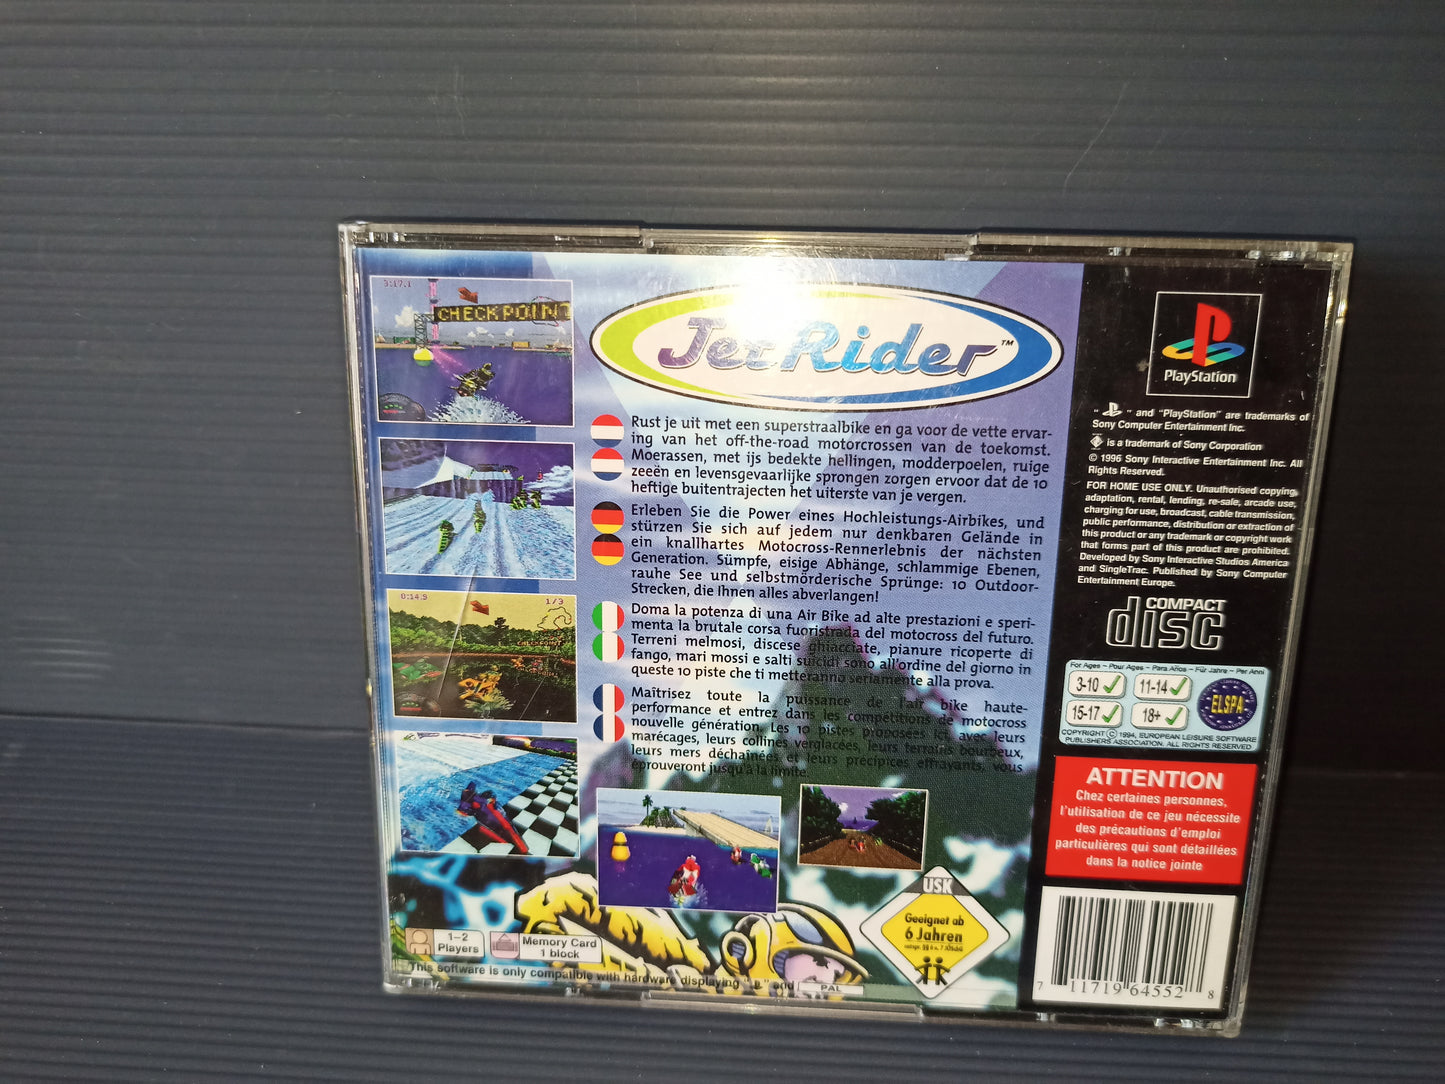 Jet Rider video game for PlayStation 1